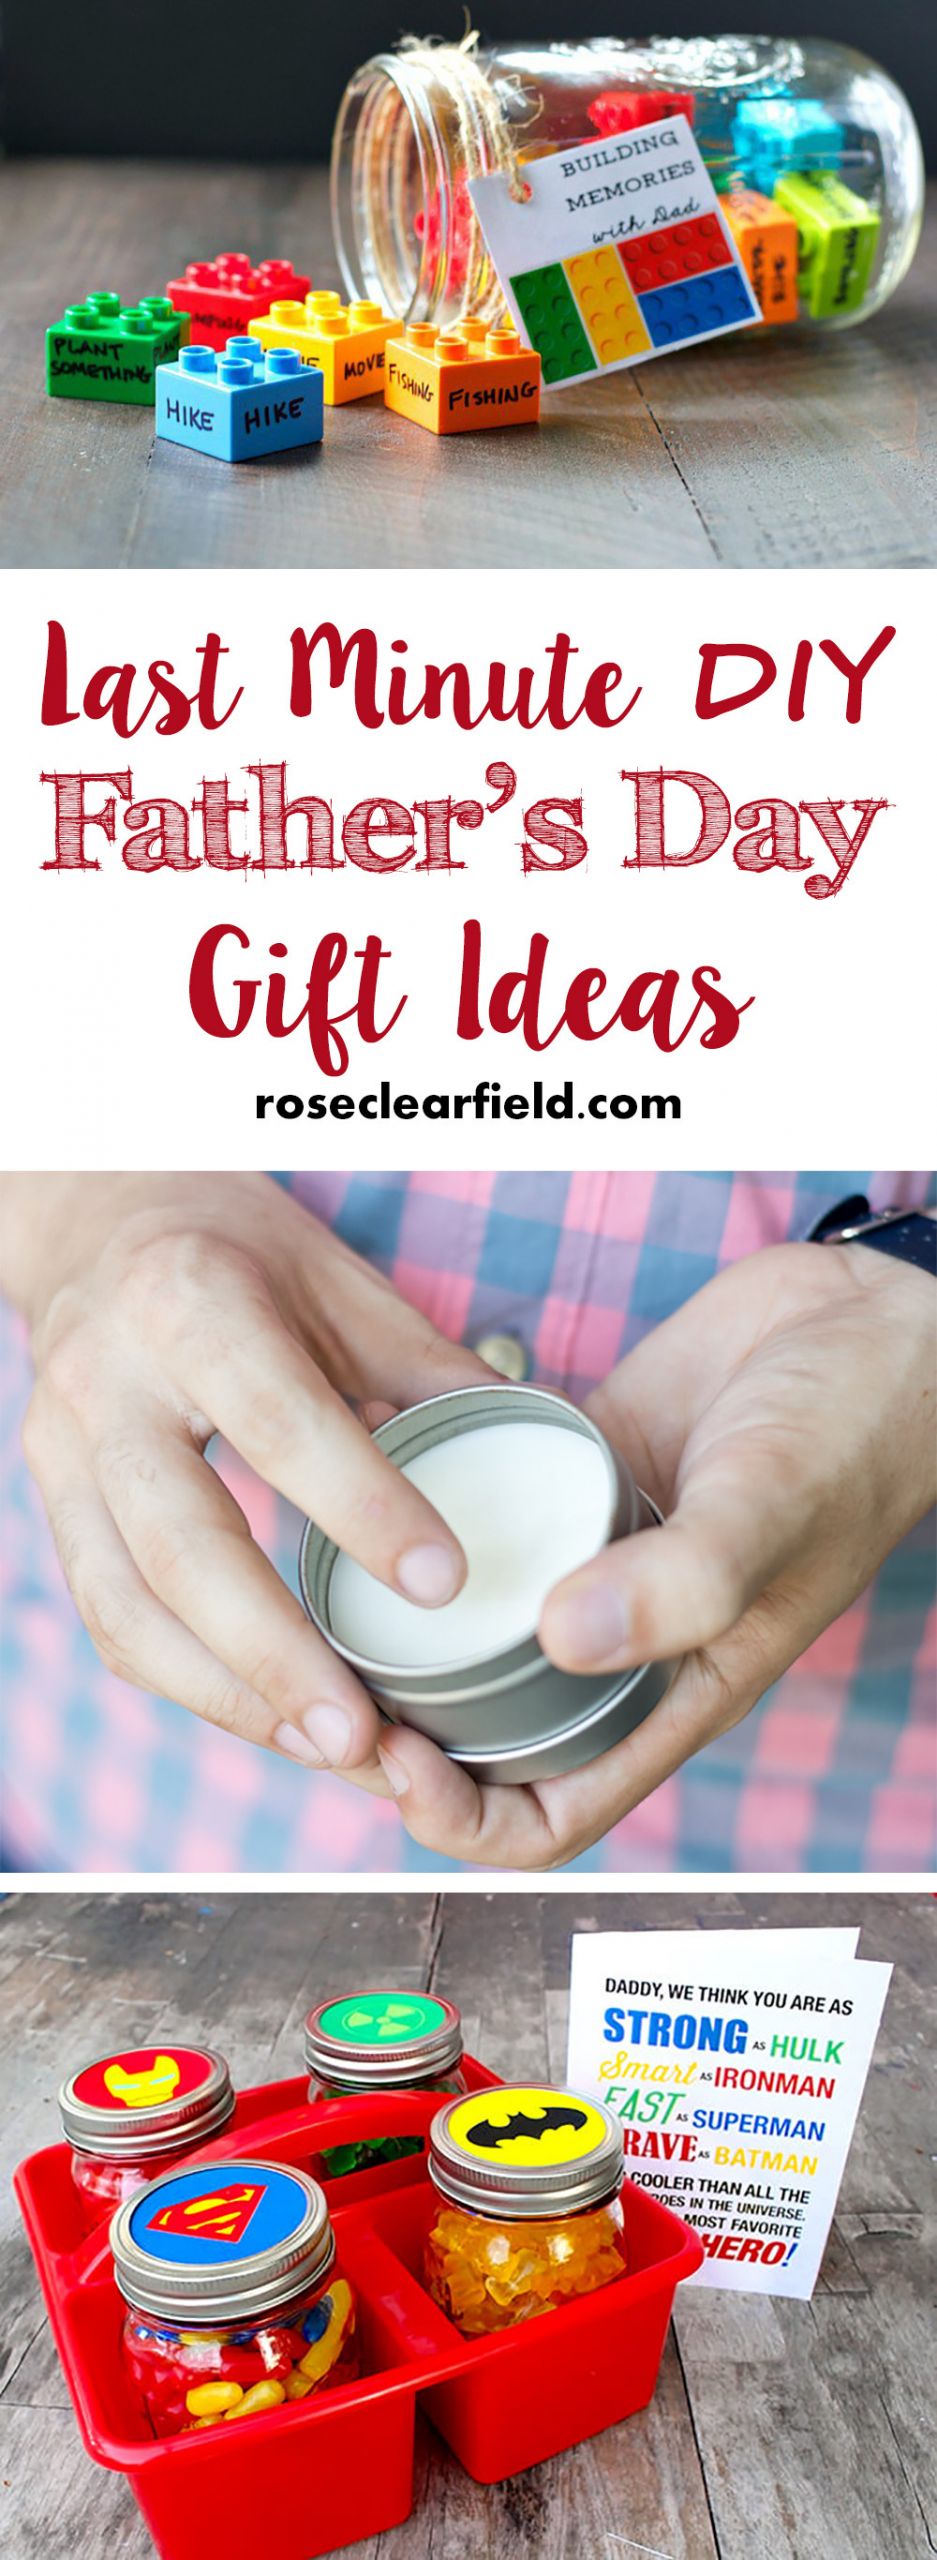 Father'S Day Picture Gift Ideas
 Last Minute DIY Father s Day Gift Ideas • Rose Clearfield